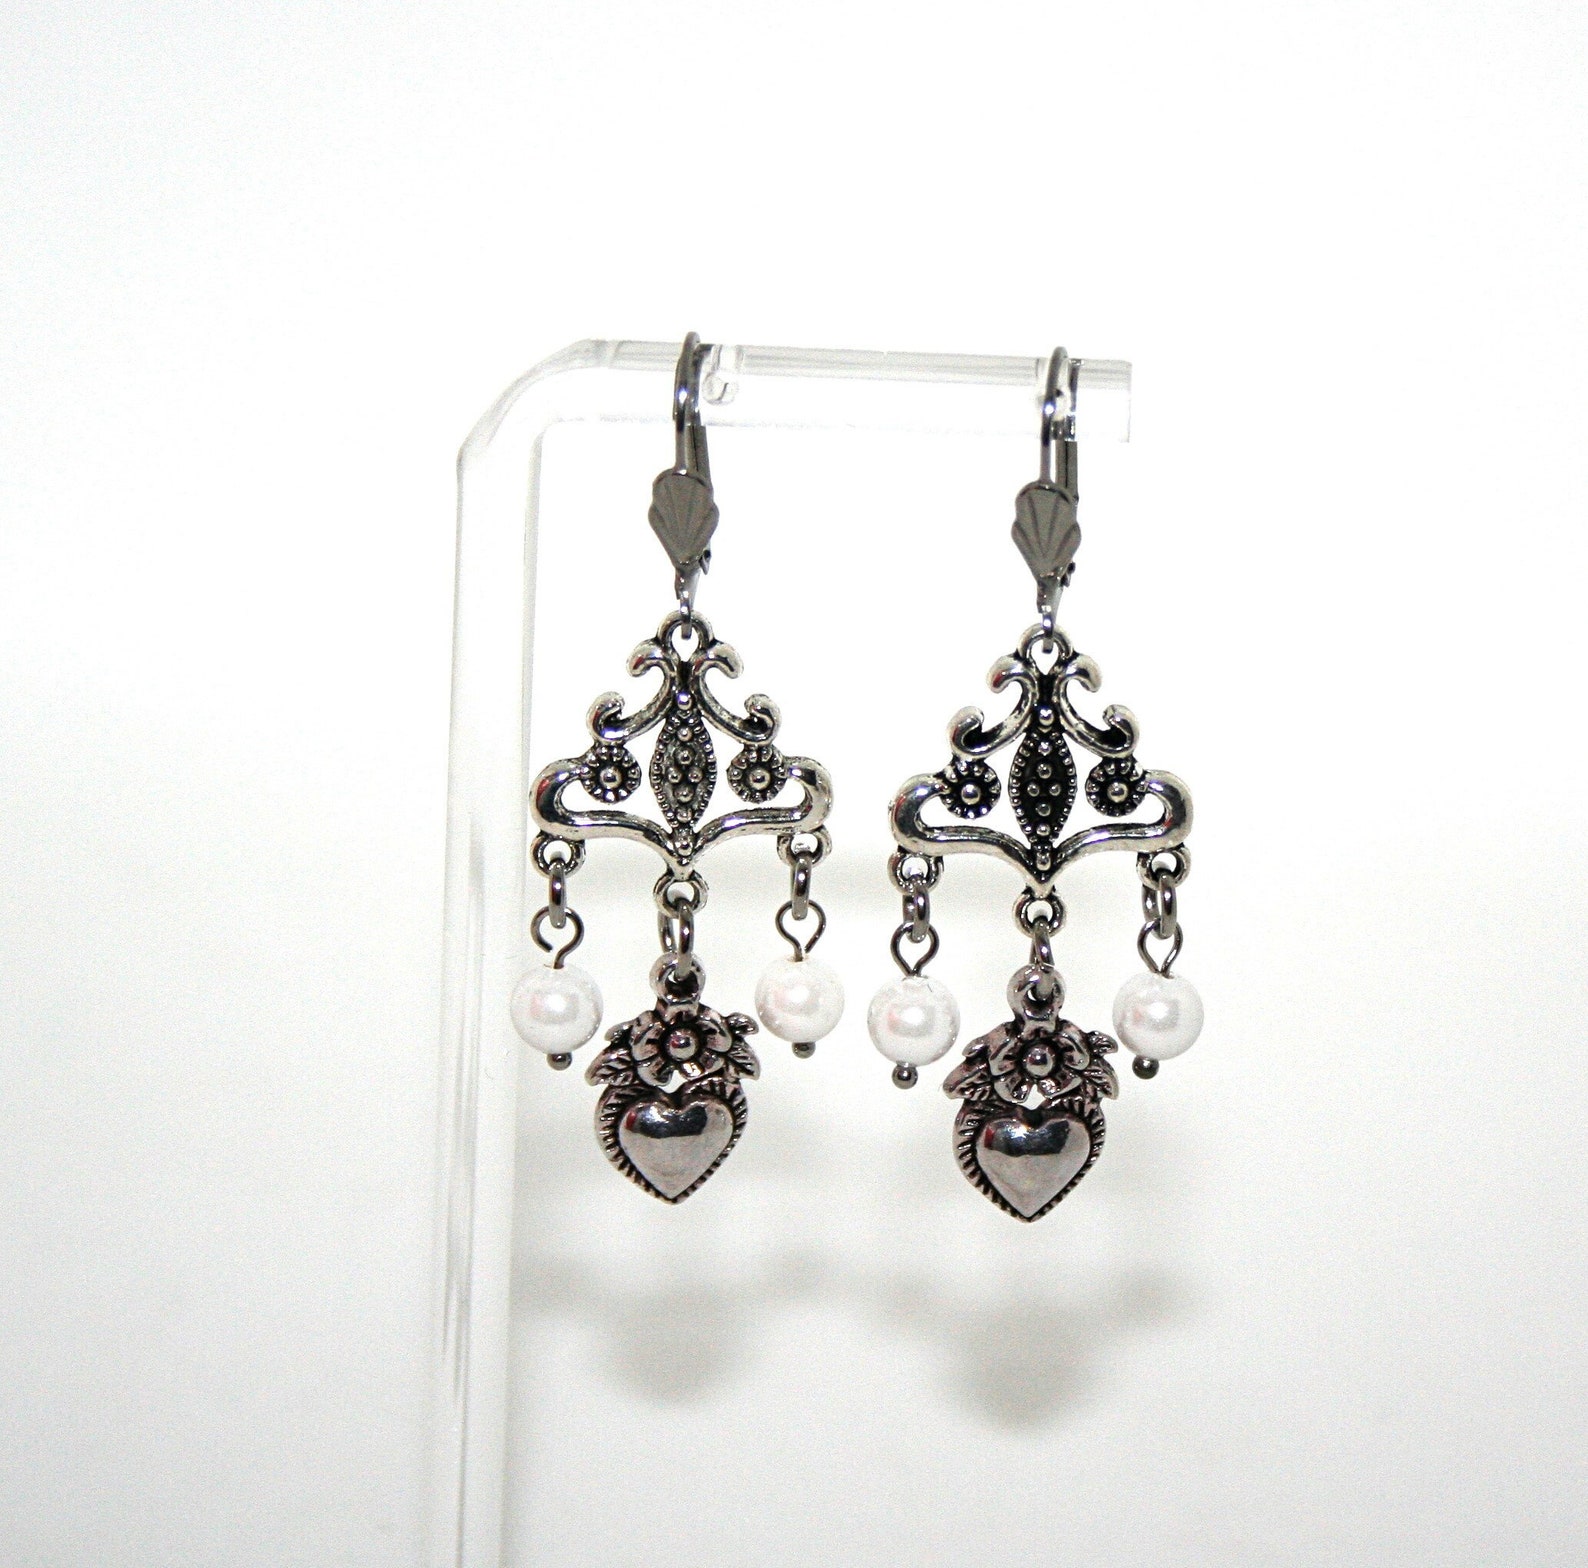 Antique silver-colored earrings with heart pendants and pearls, dirndl jewelry